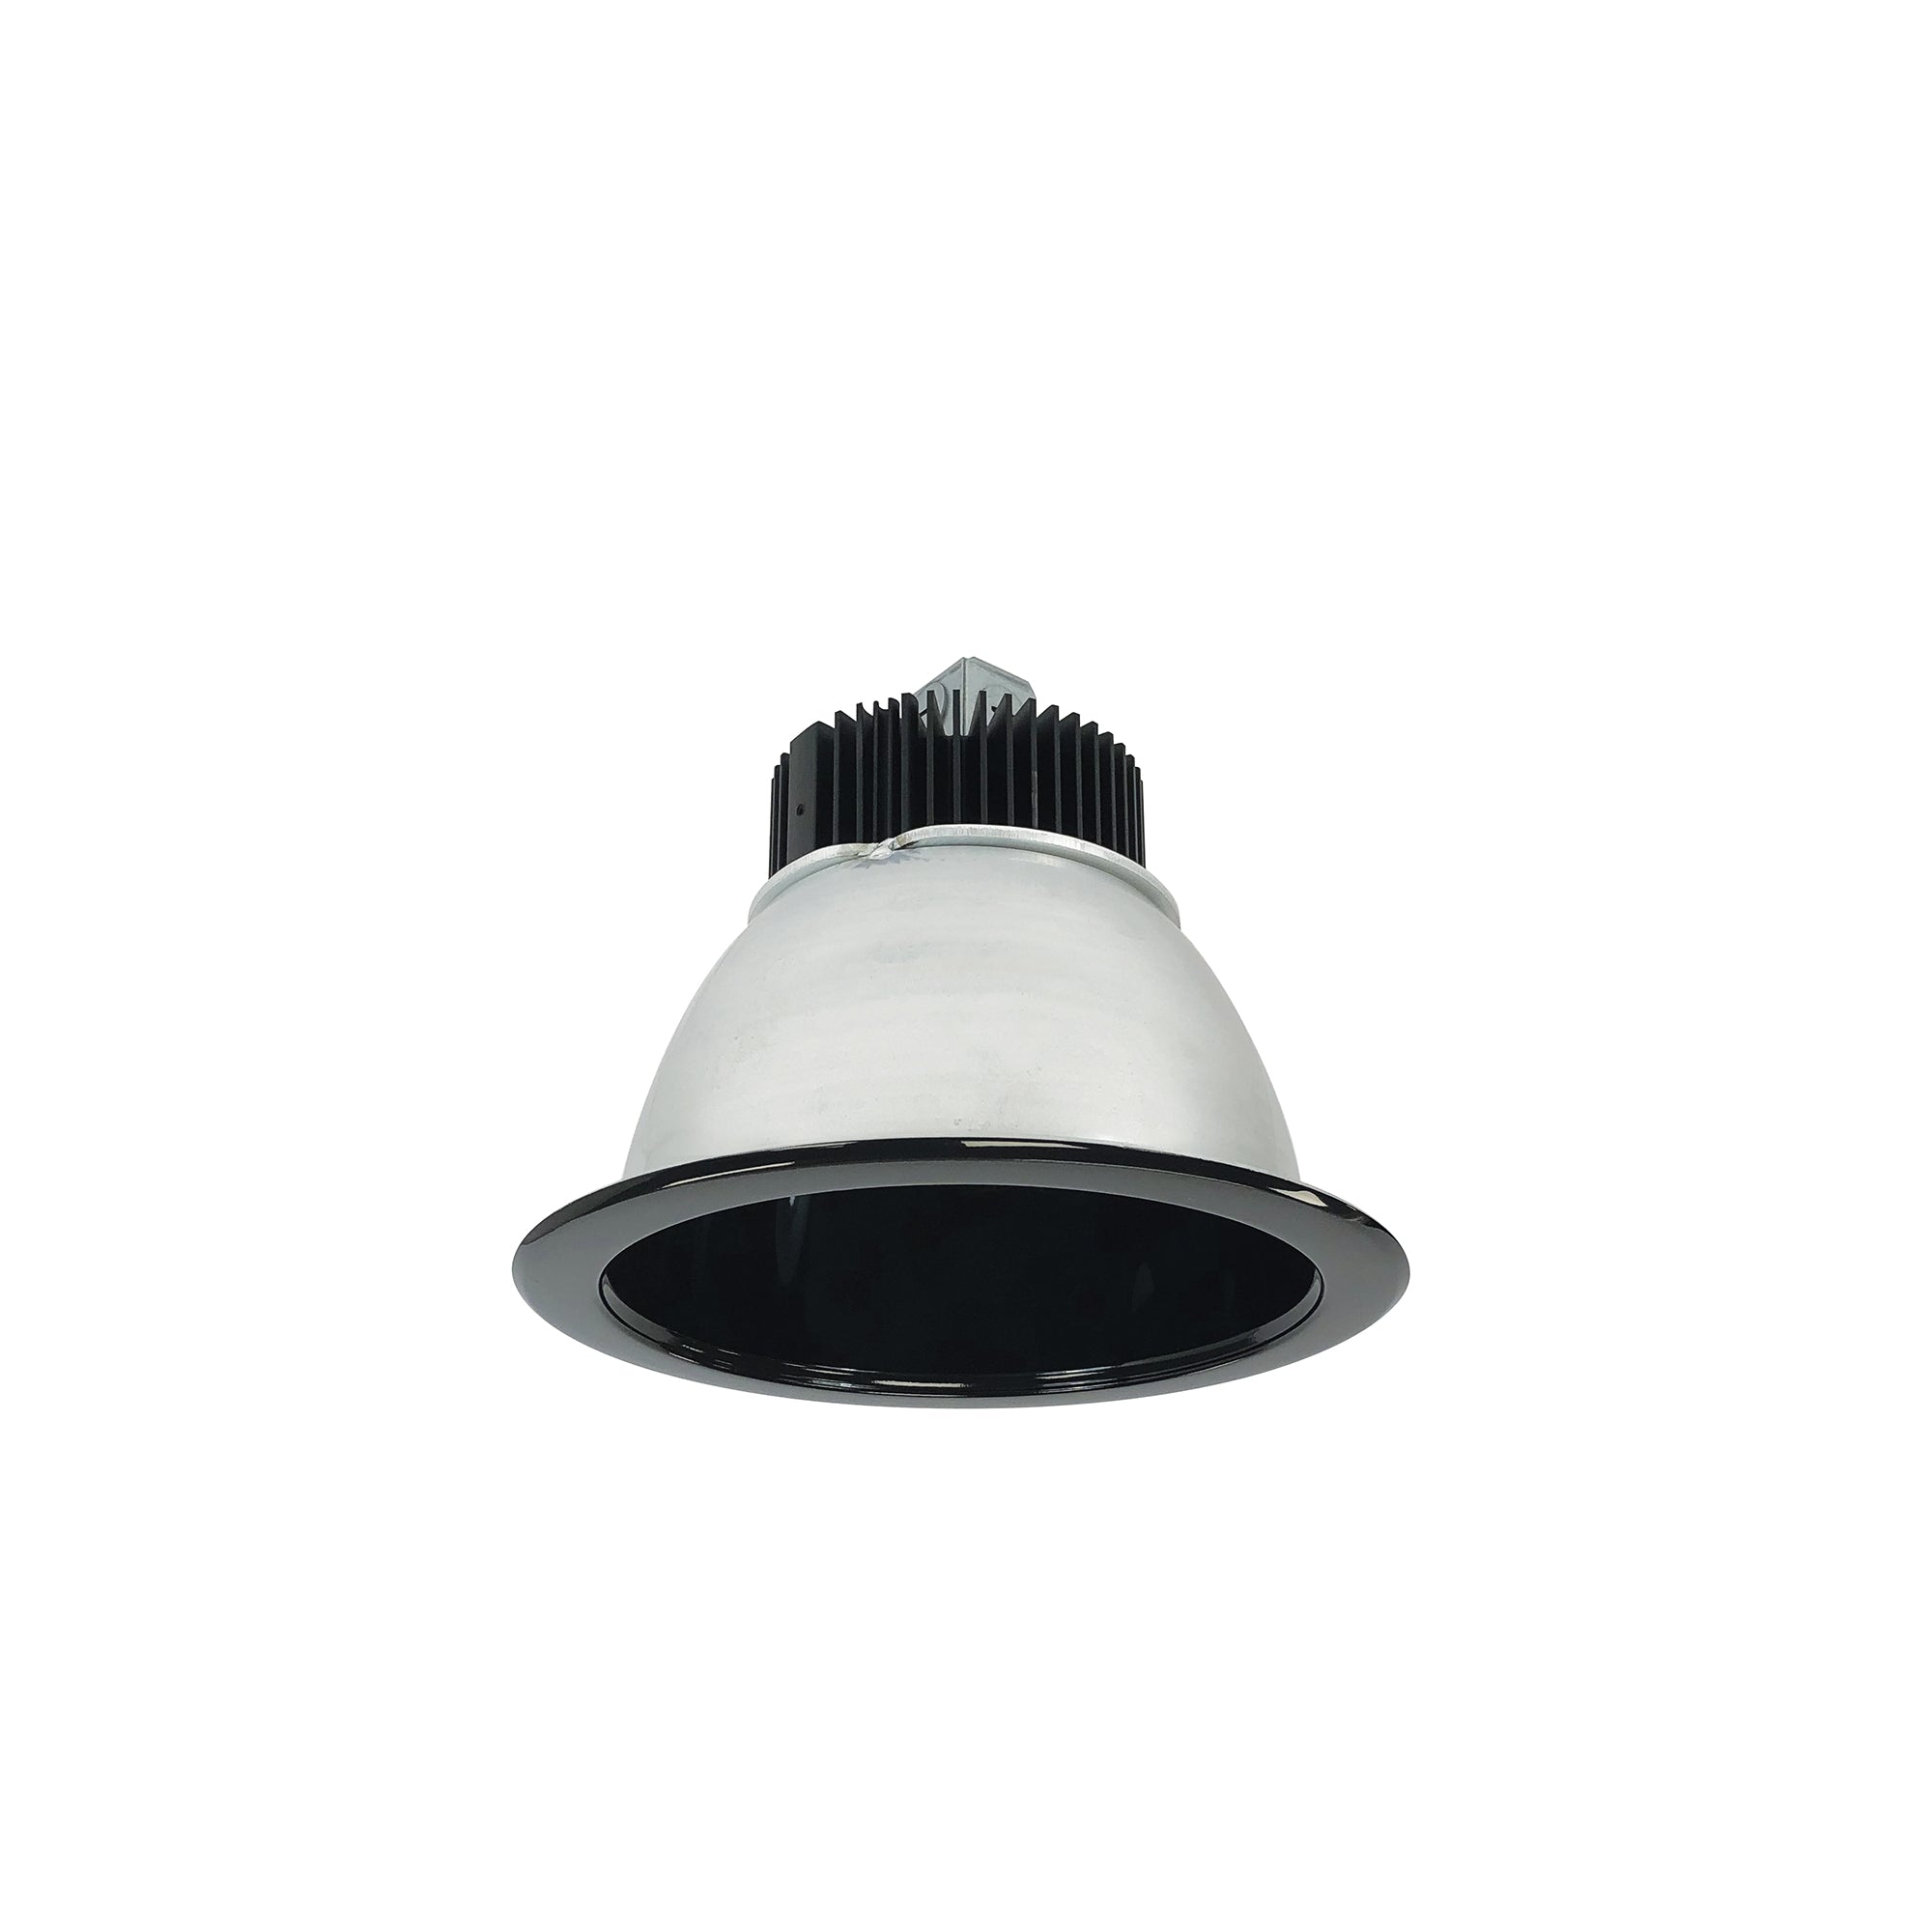 Nora Lighting NC2-631L0930SBSF - Recessed - 6 Inch Sapphire II Open Reflector, 900lm, 3000K, 20-Degrees Spot, Black Self Flanged